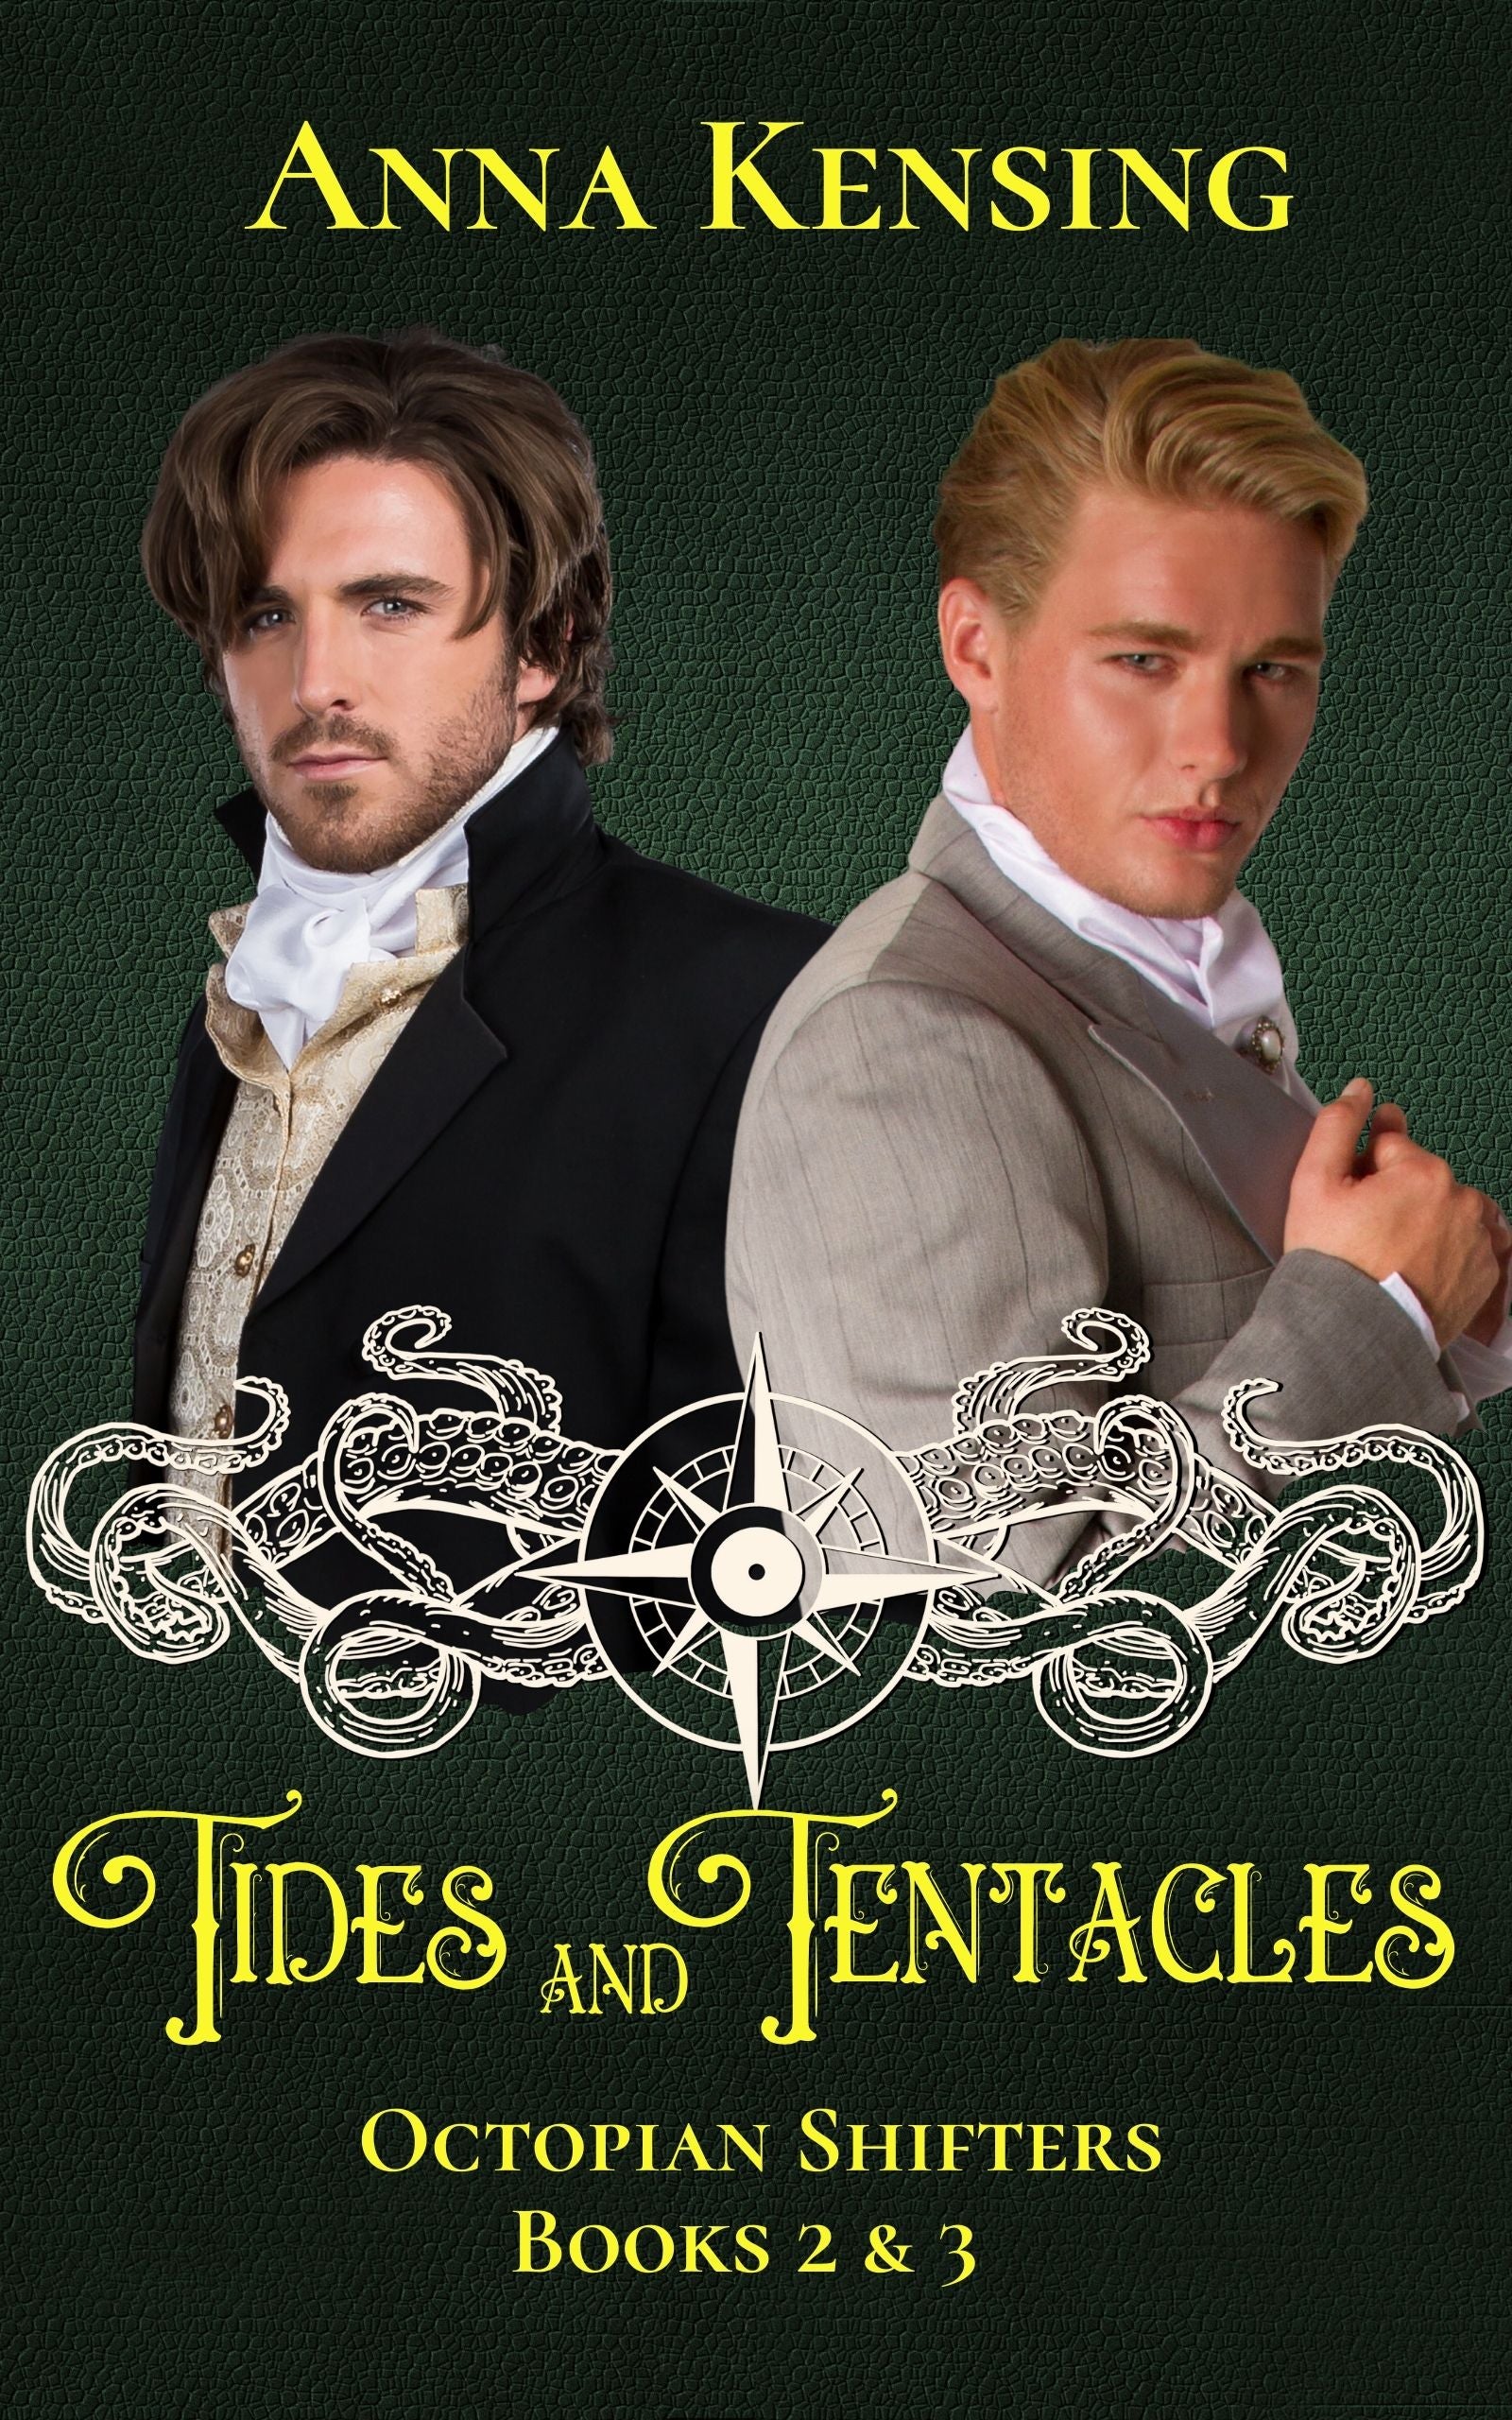 Cover for Tides and Tentacles boxed set by Anna Kensing